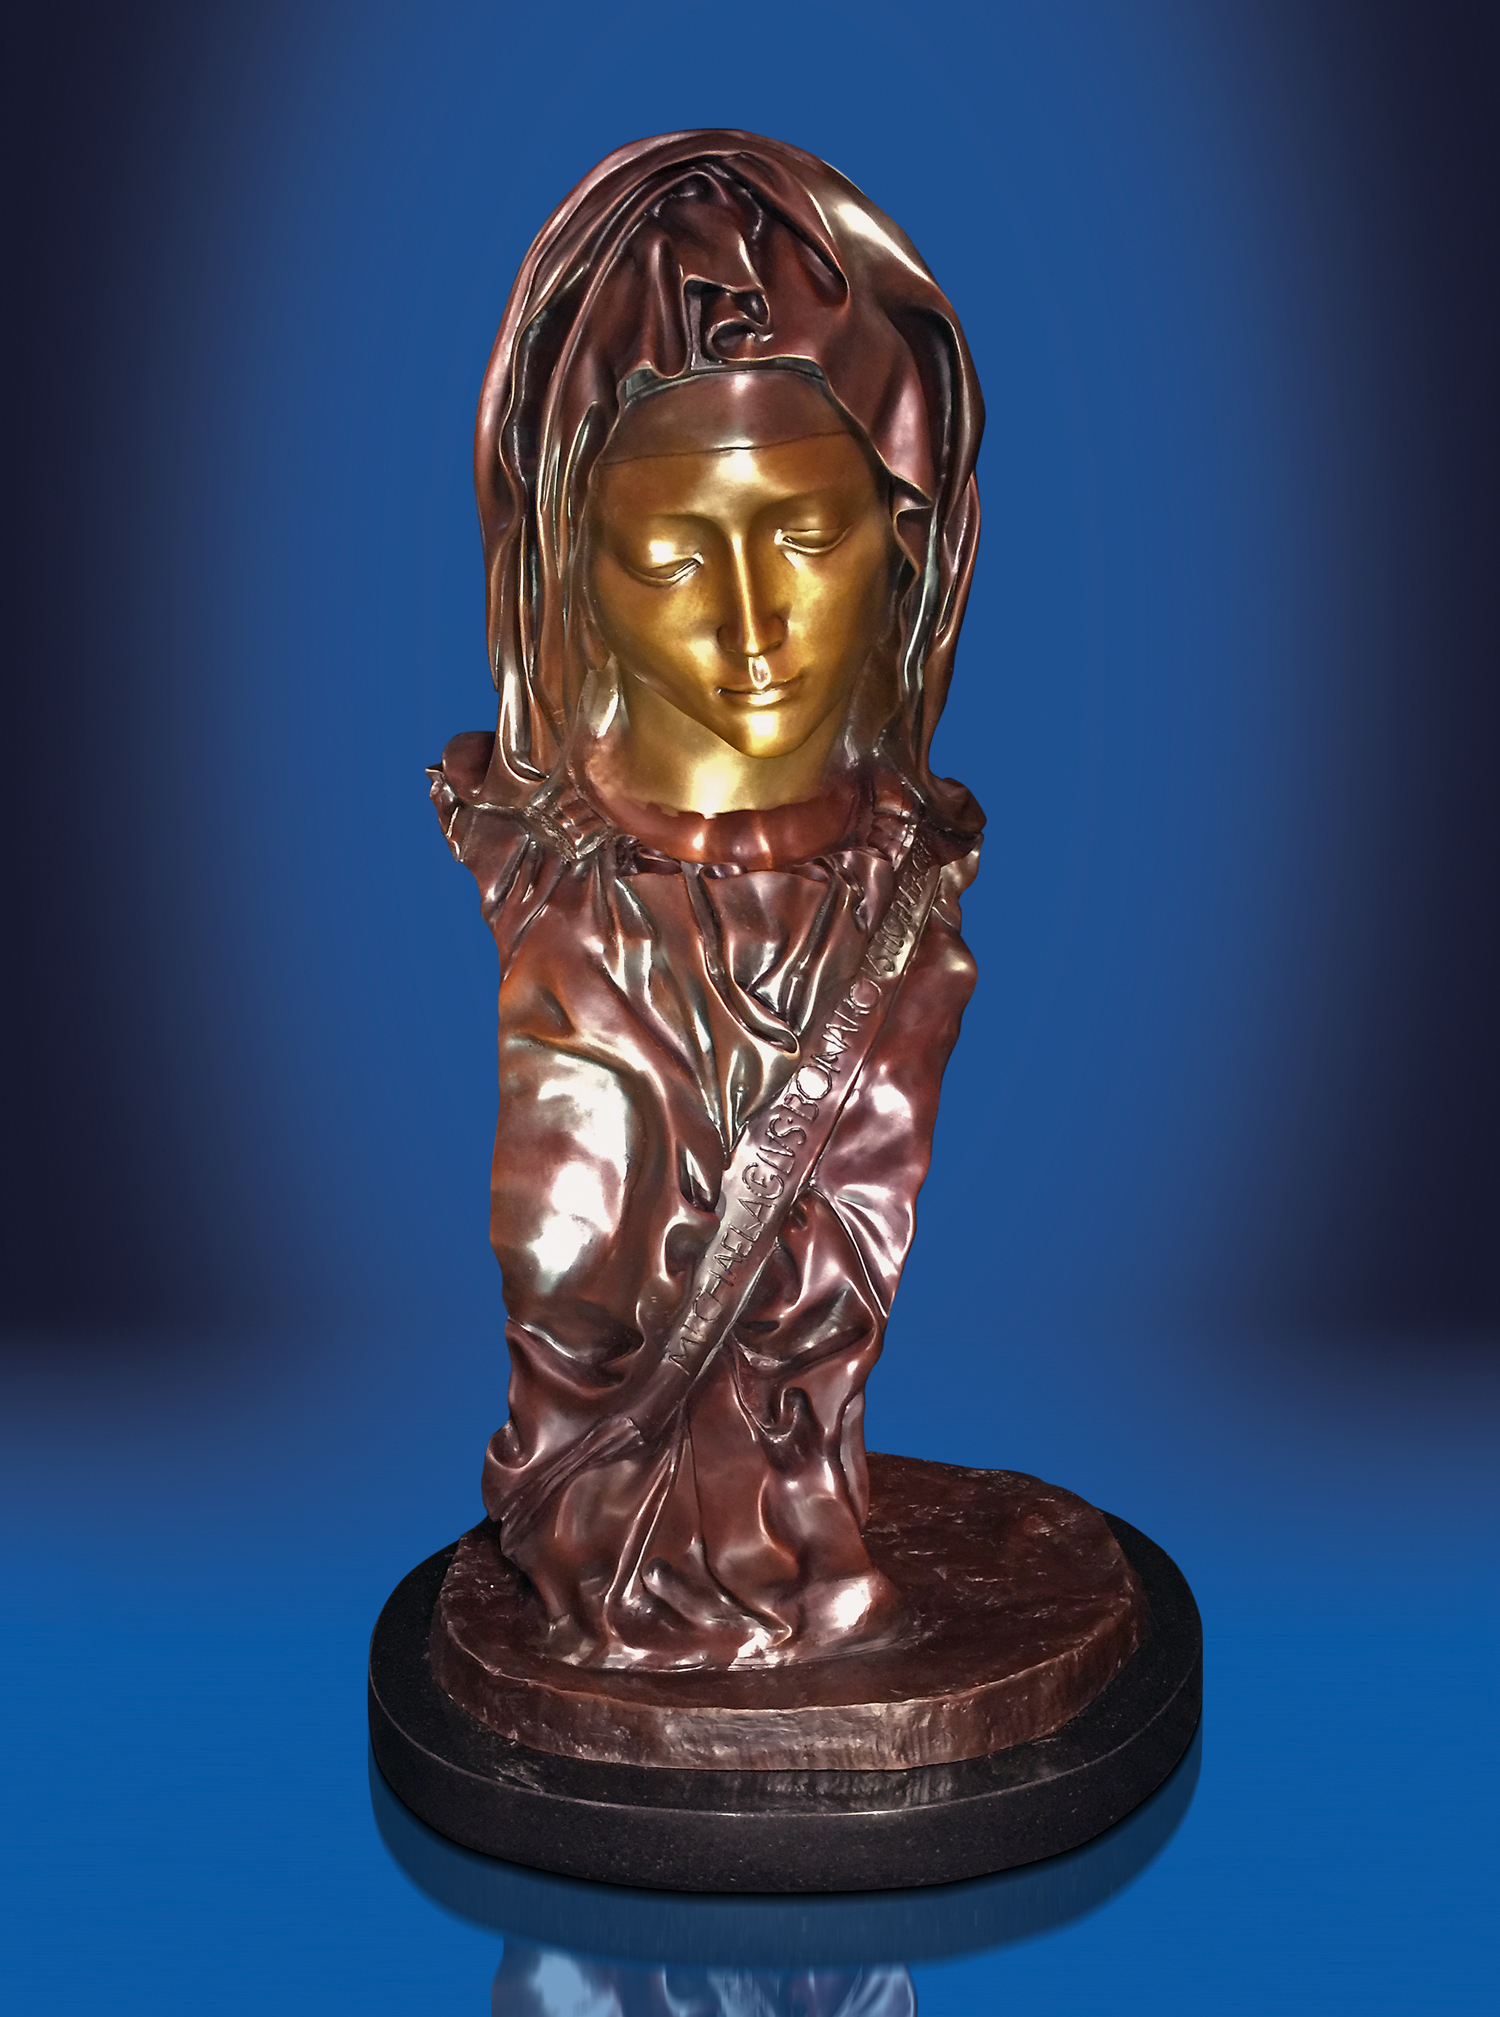 Madonna Bust Michelangelo cast by Foundry Michelangelo in a limited edition of 777